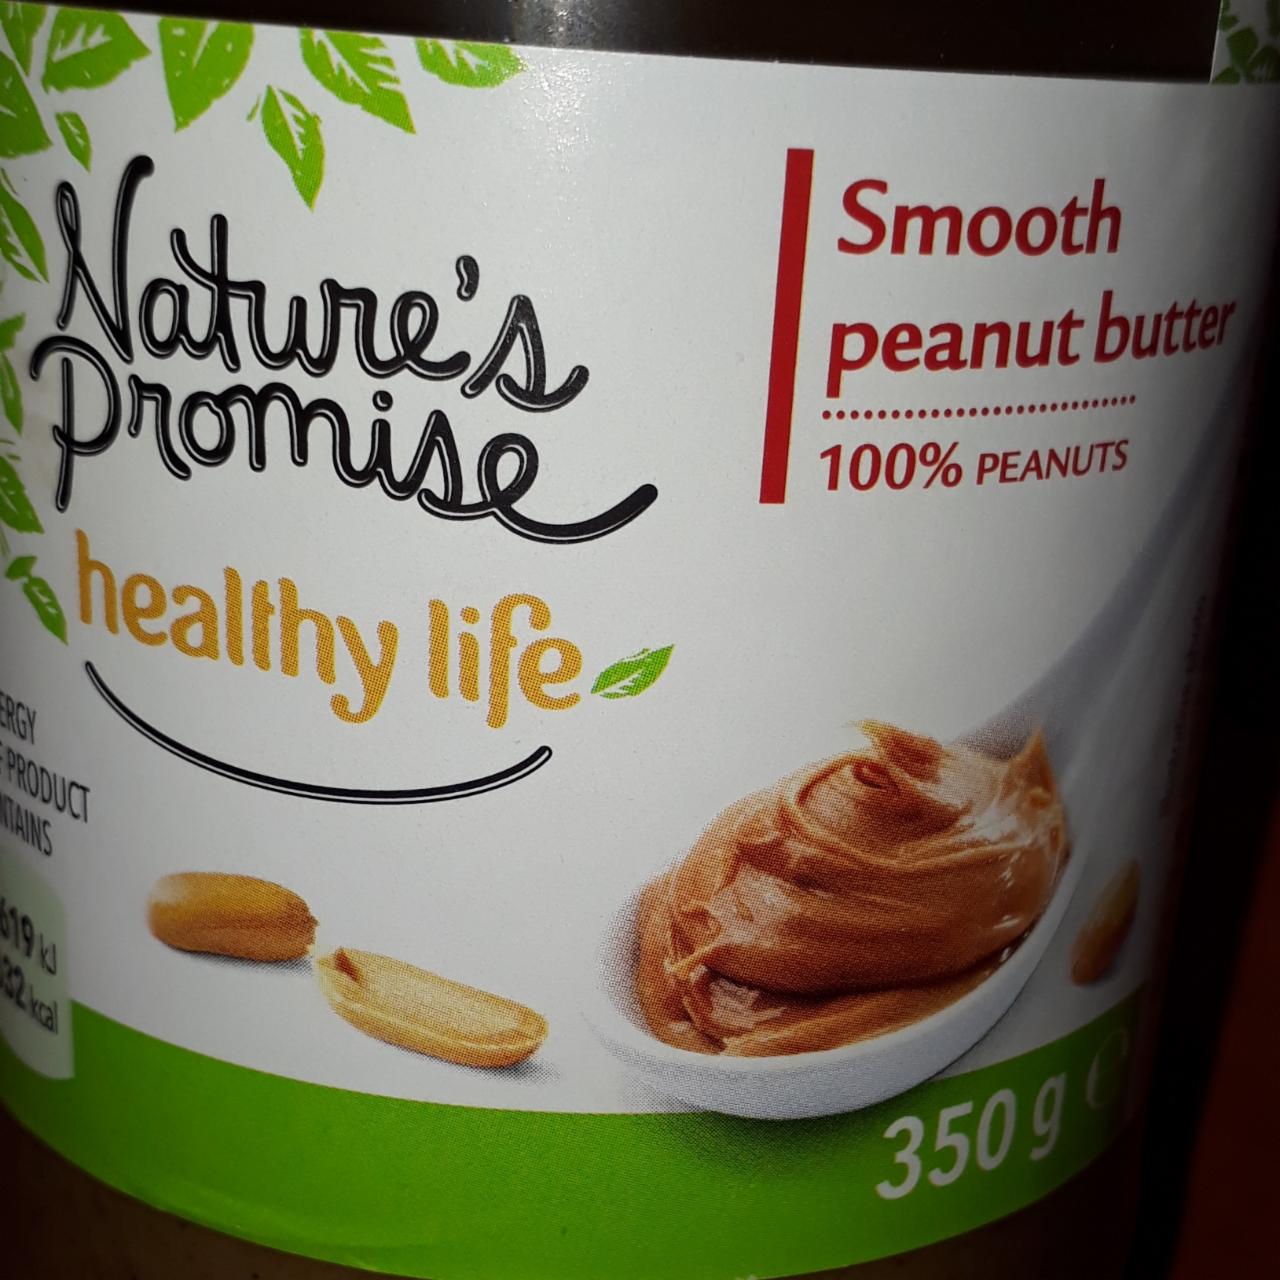 Fotografie - Healthy life Peanut Butter smooth Nature's Promise